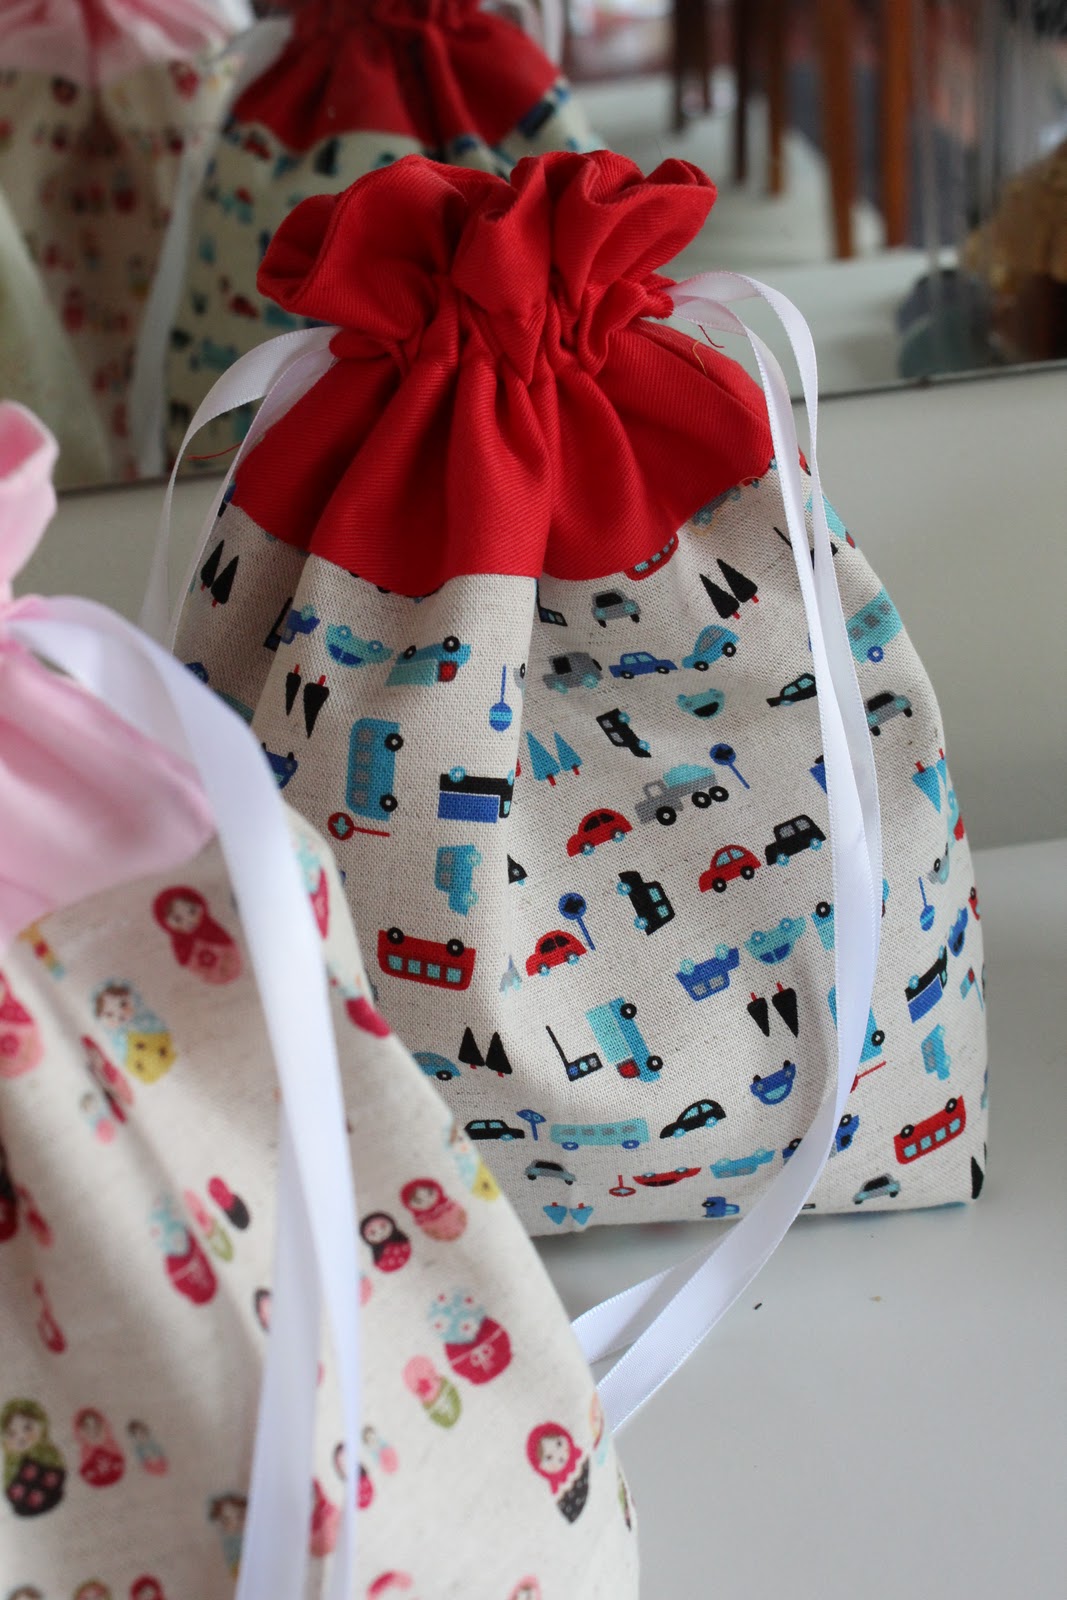 How To Sew A Drawstring Bag - Essortment Articles: Free Online